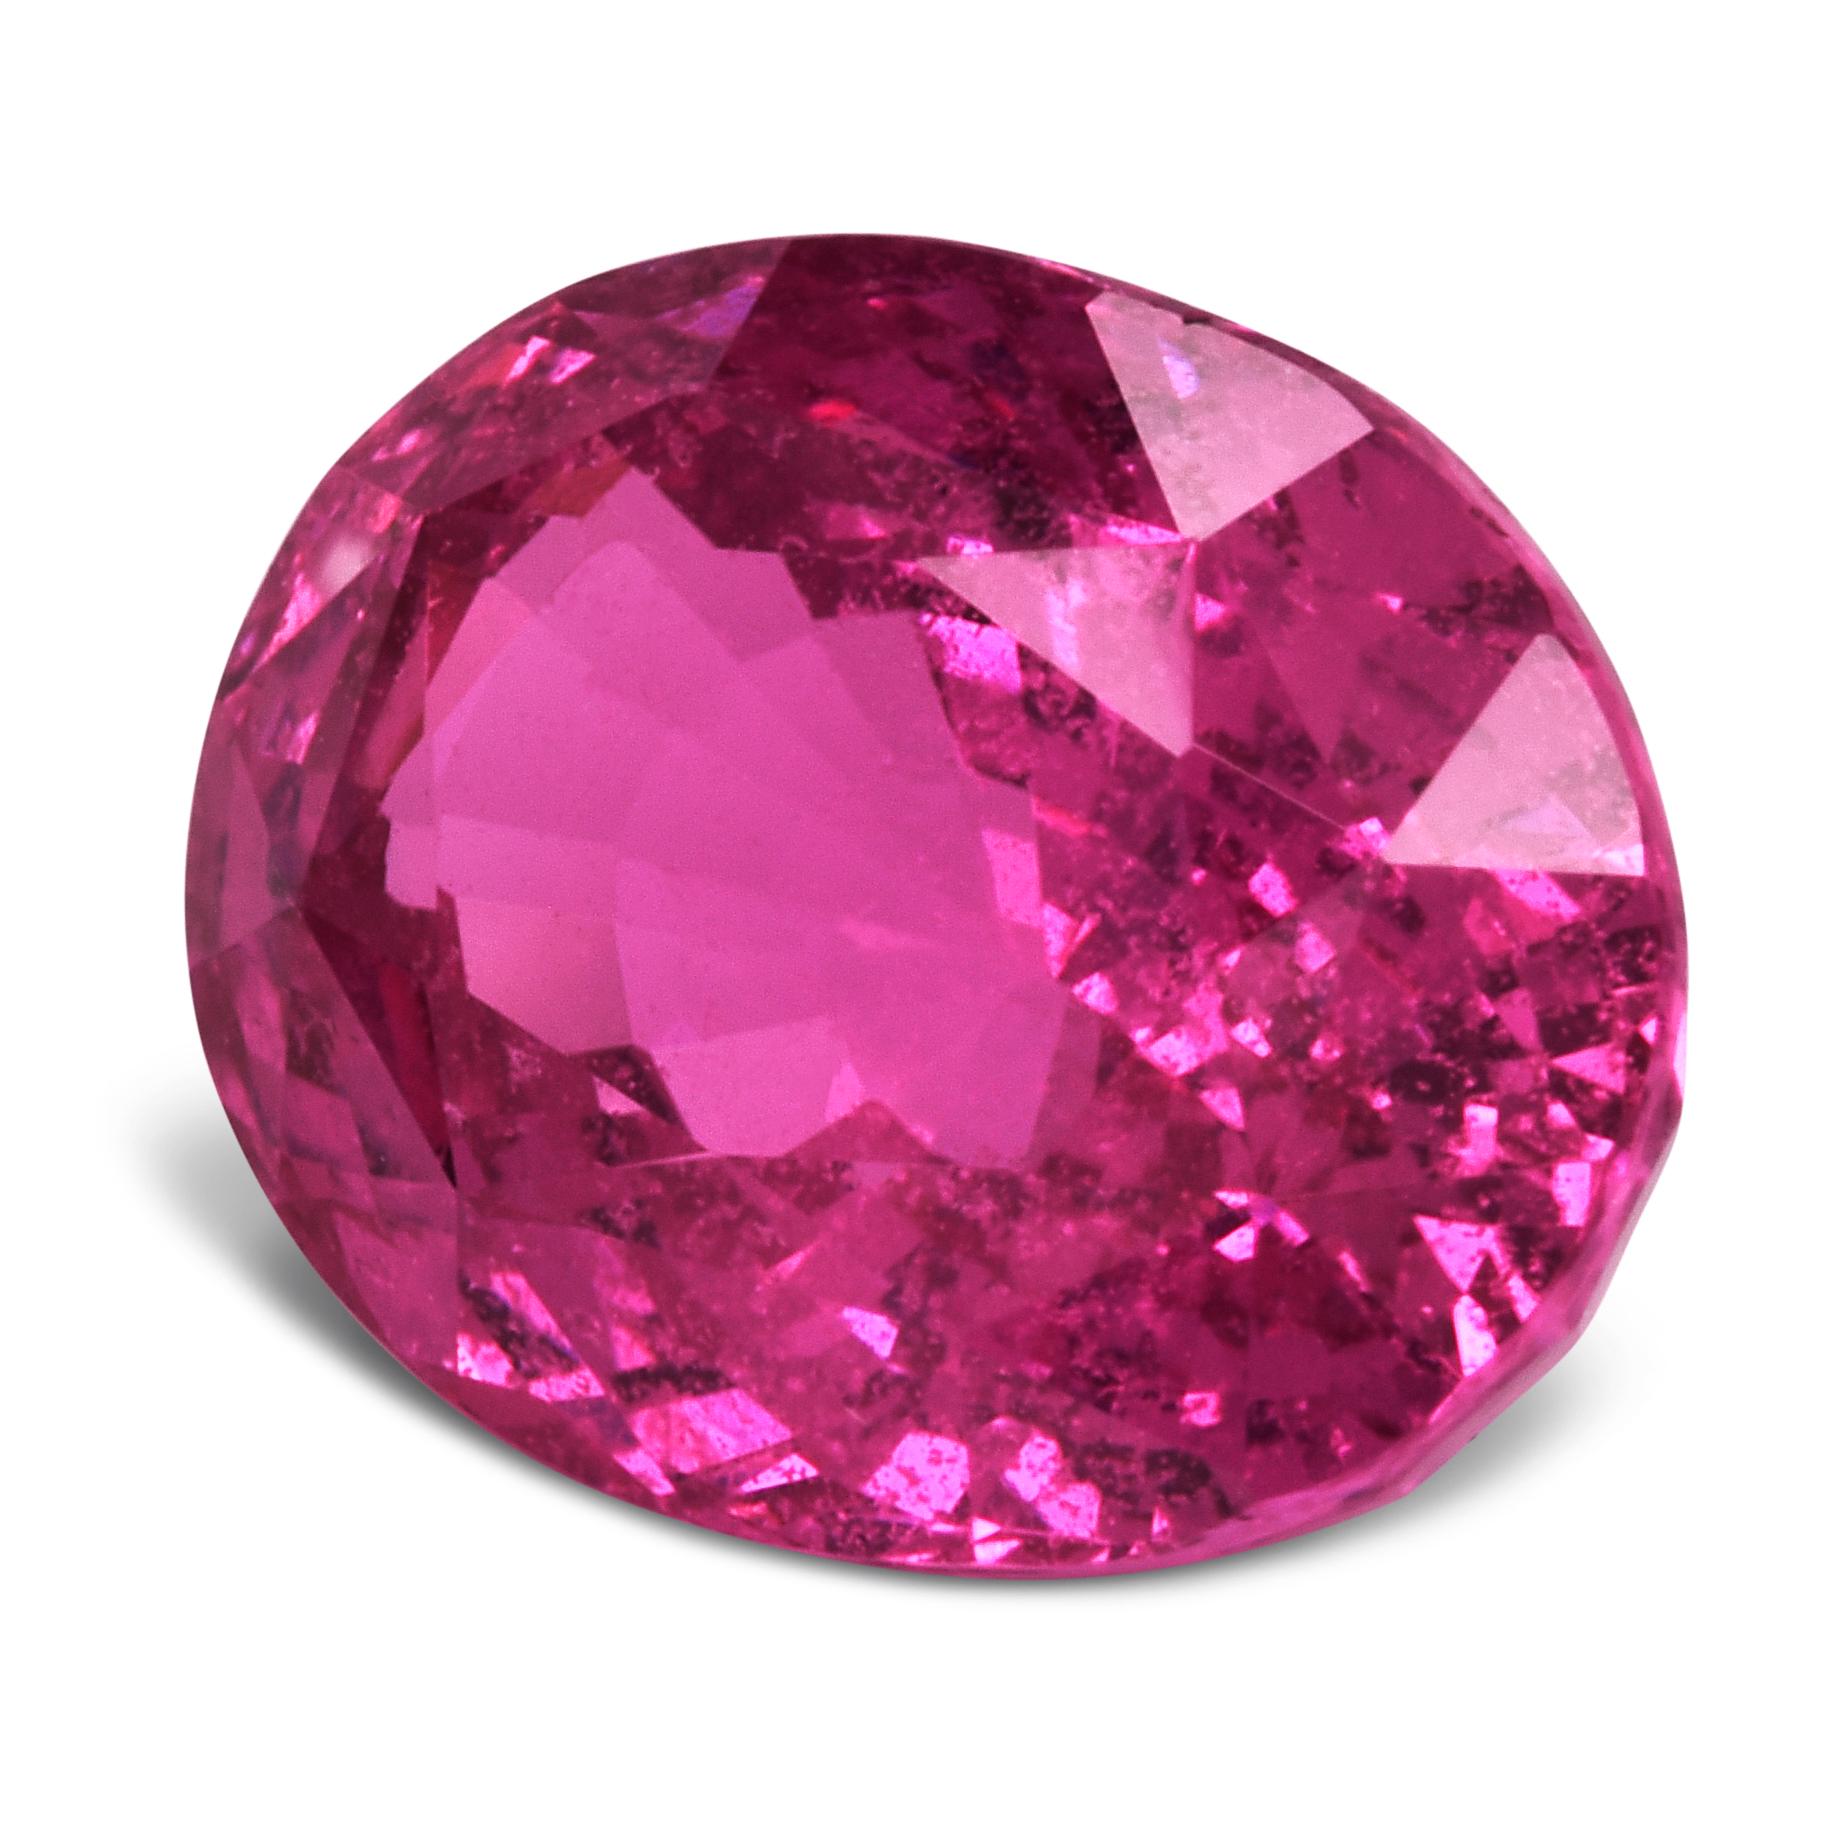 Mixed Cut AGL Certified 3.63 Carats Heated Pink Sapphire For Sale